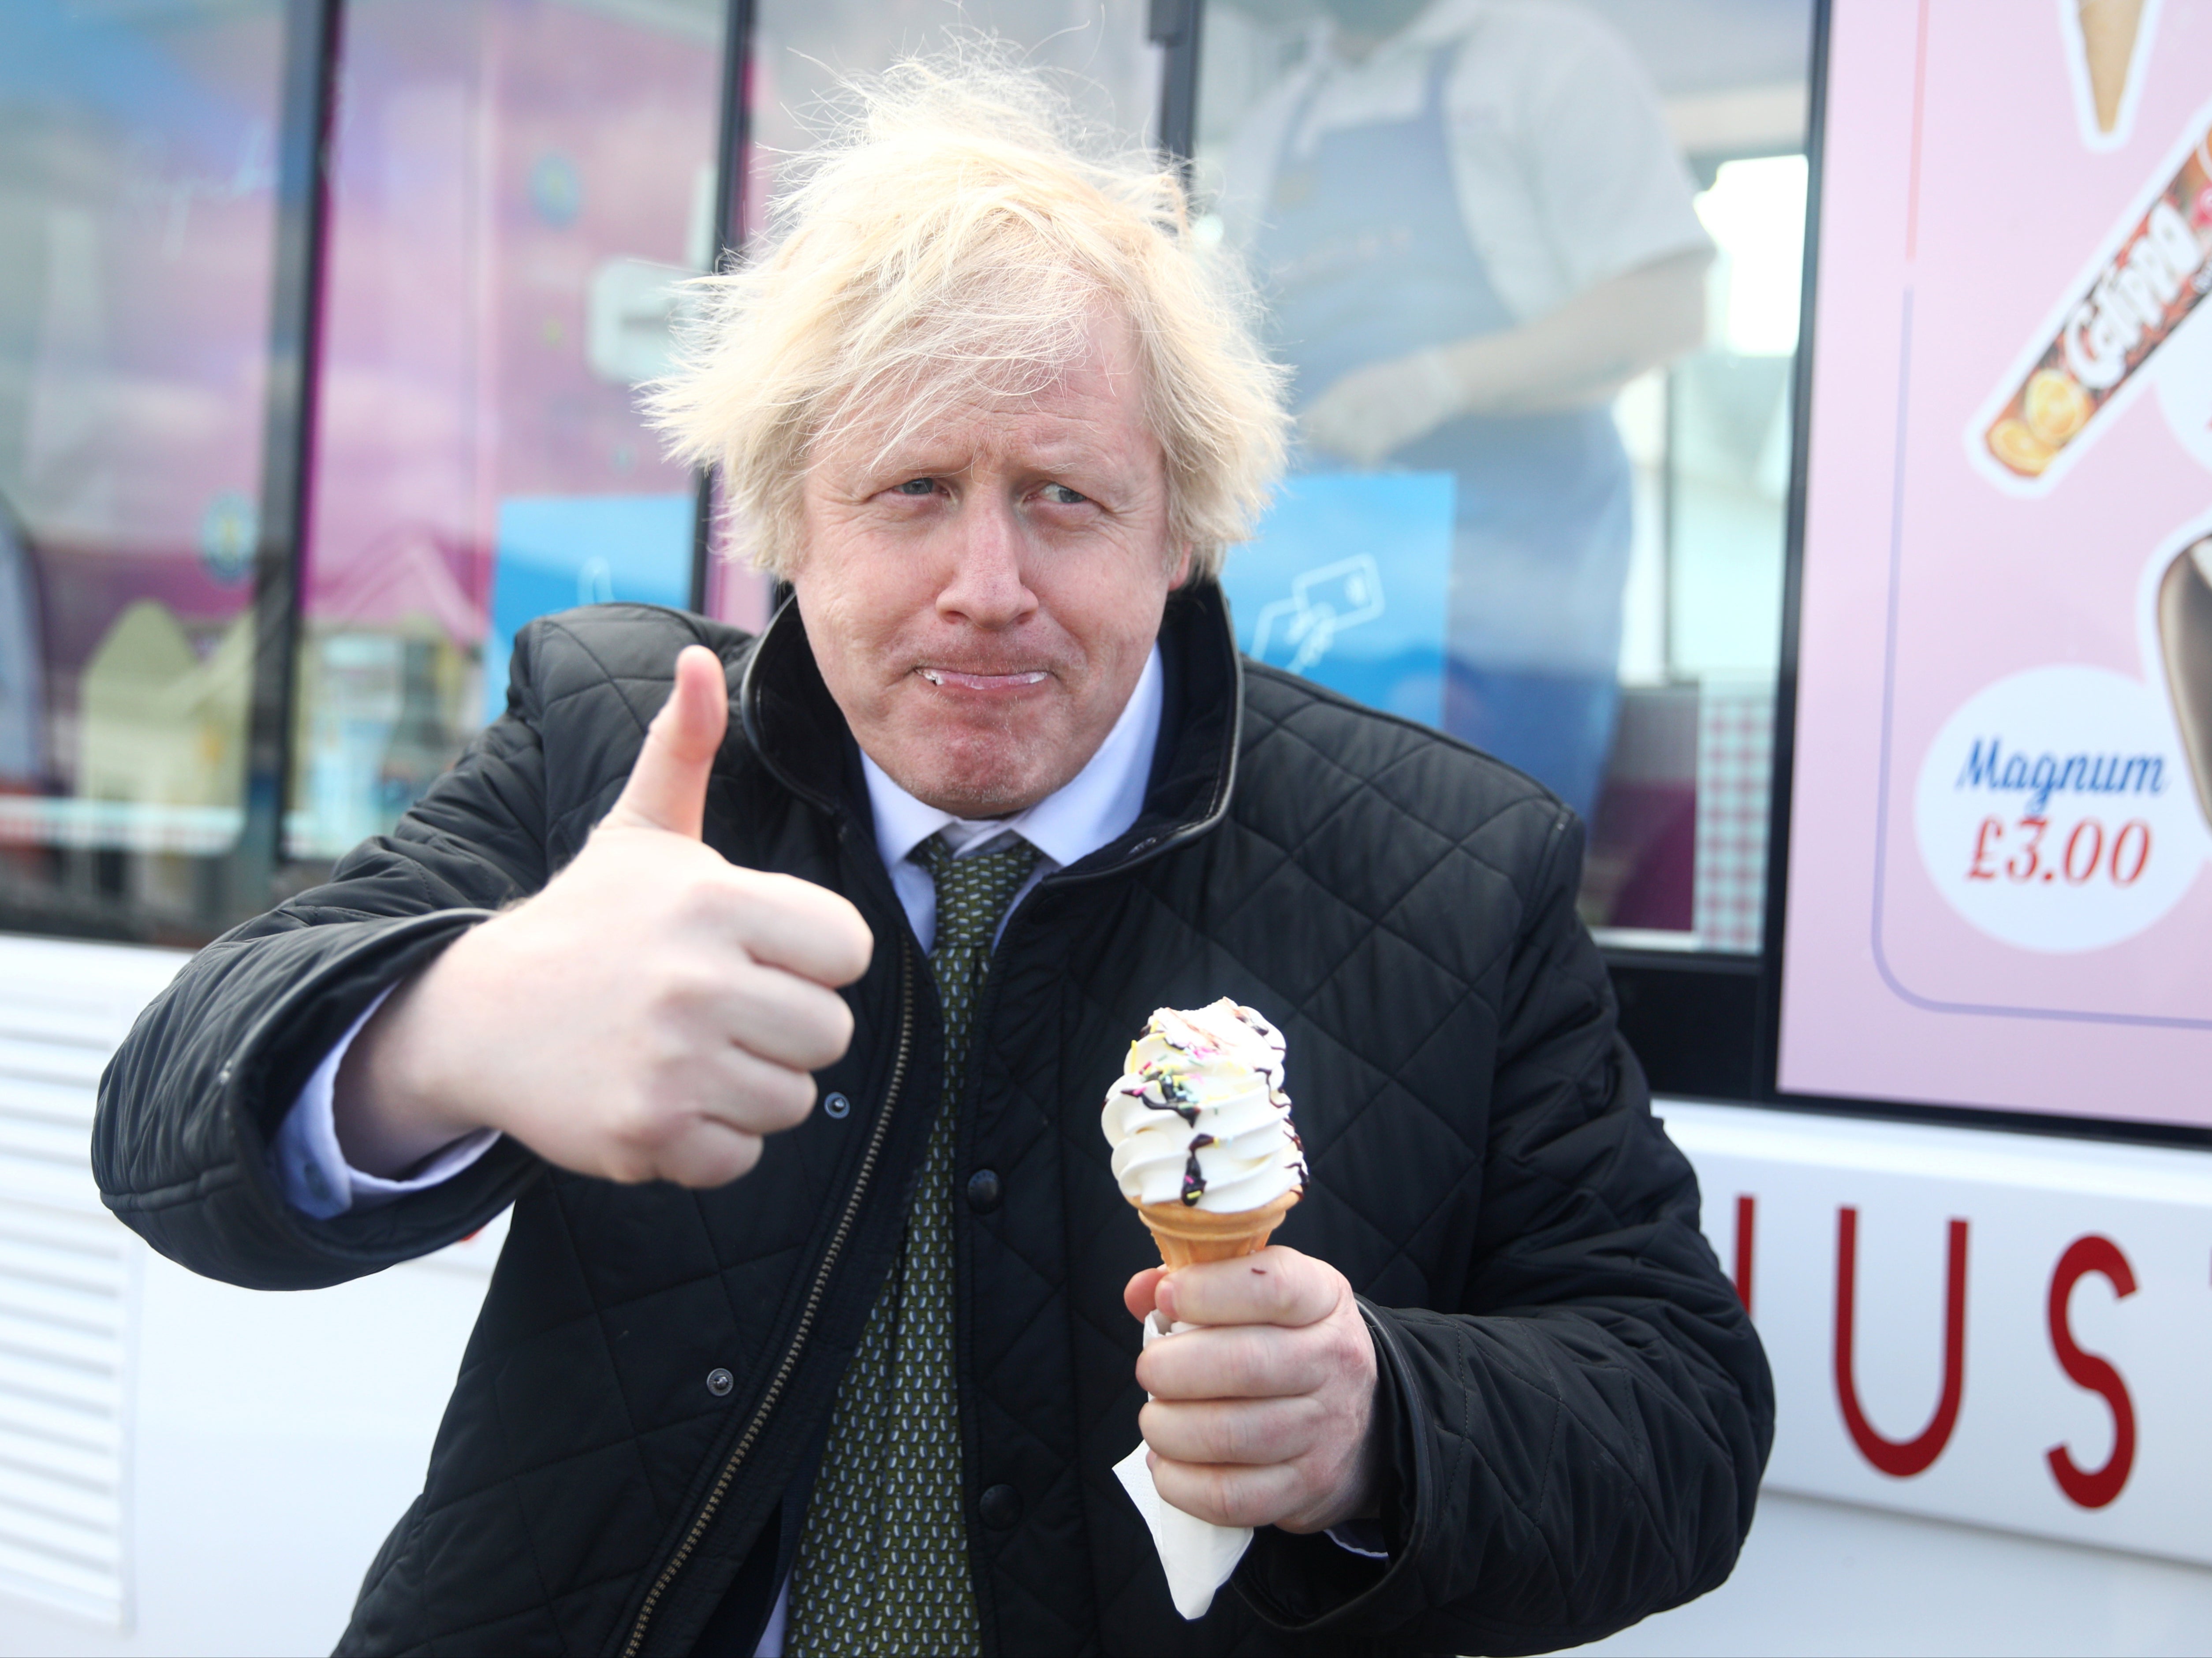 Mr Johnson tucking into an ice cream during a visit to Haven Perran Sands Holiday Park in Perranporth, Cornwall, in April 2021